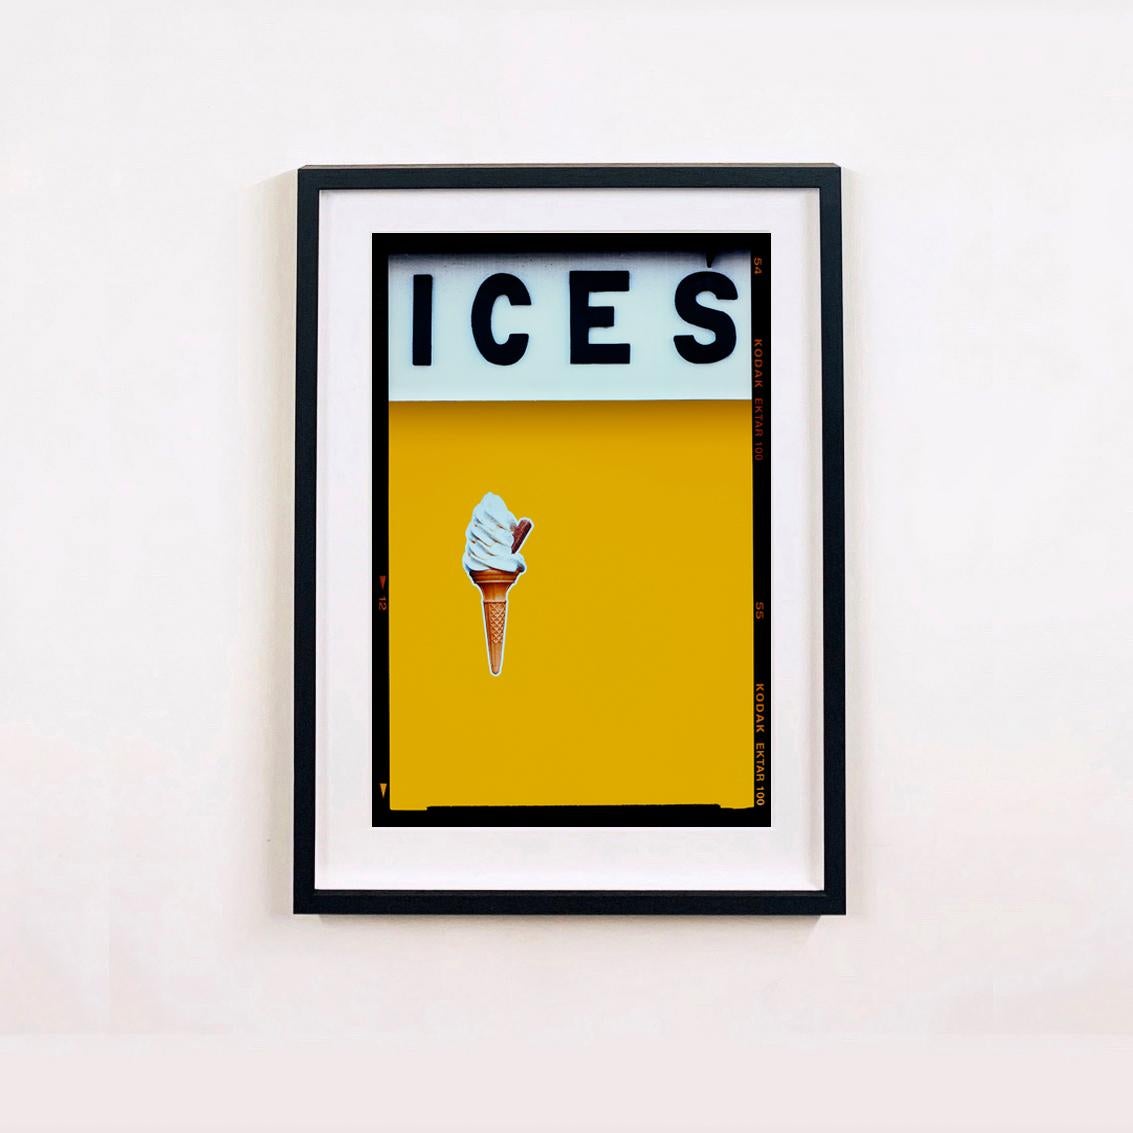 Ices (Mustard Yellow), Bexhill-on-Sea - British seaside color photography - Print by Richard Heeps